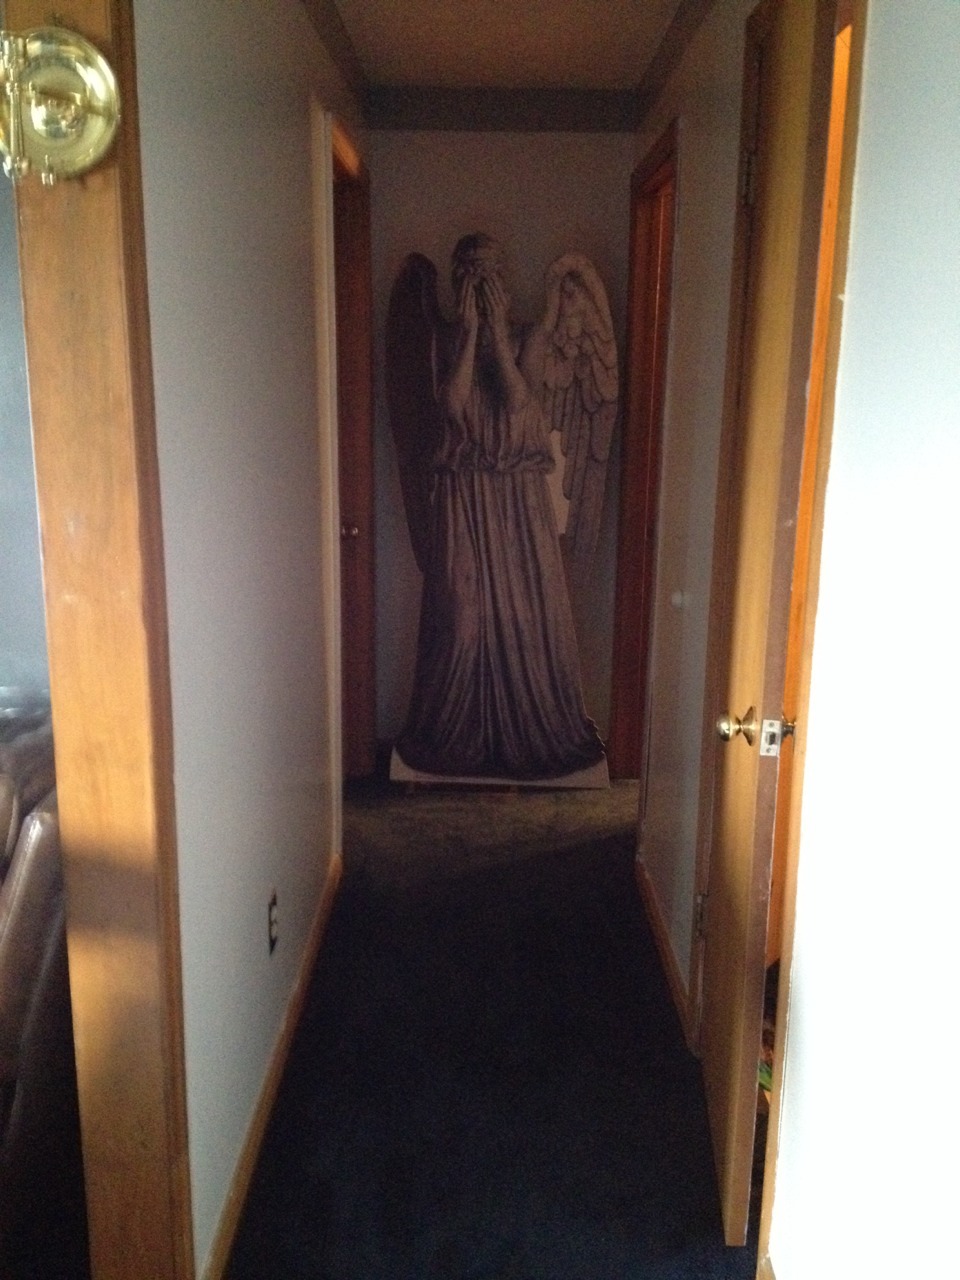 earthtomeowllory:  My mom got my sister a cardboard cut out of a weeping angel for